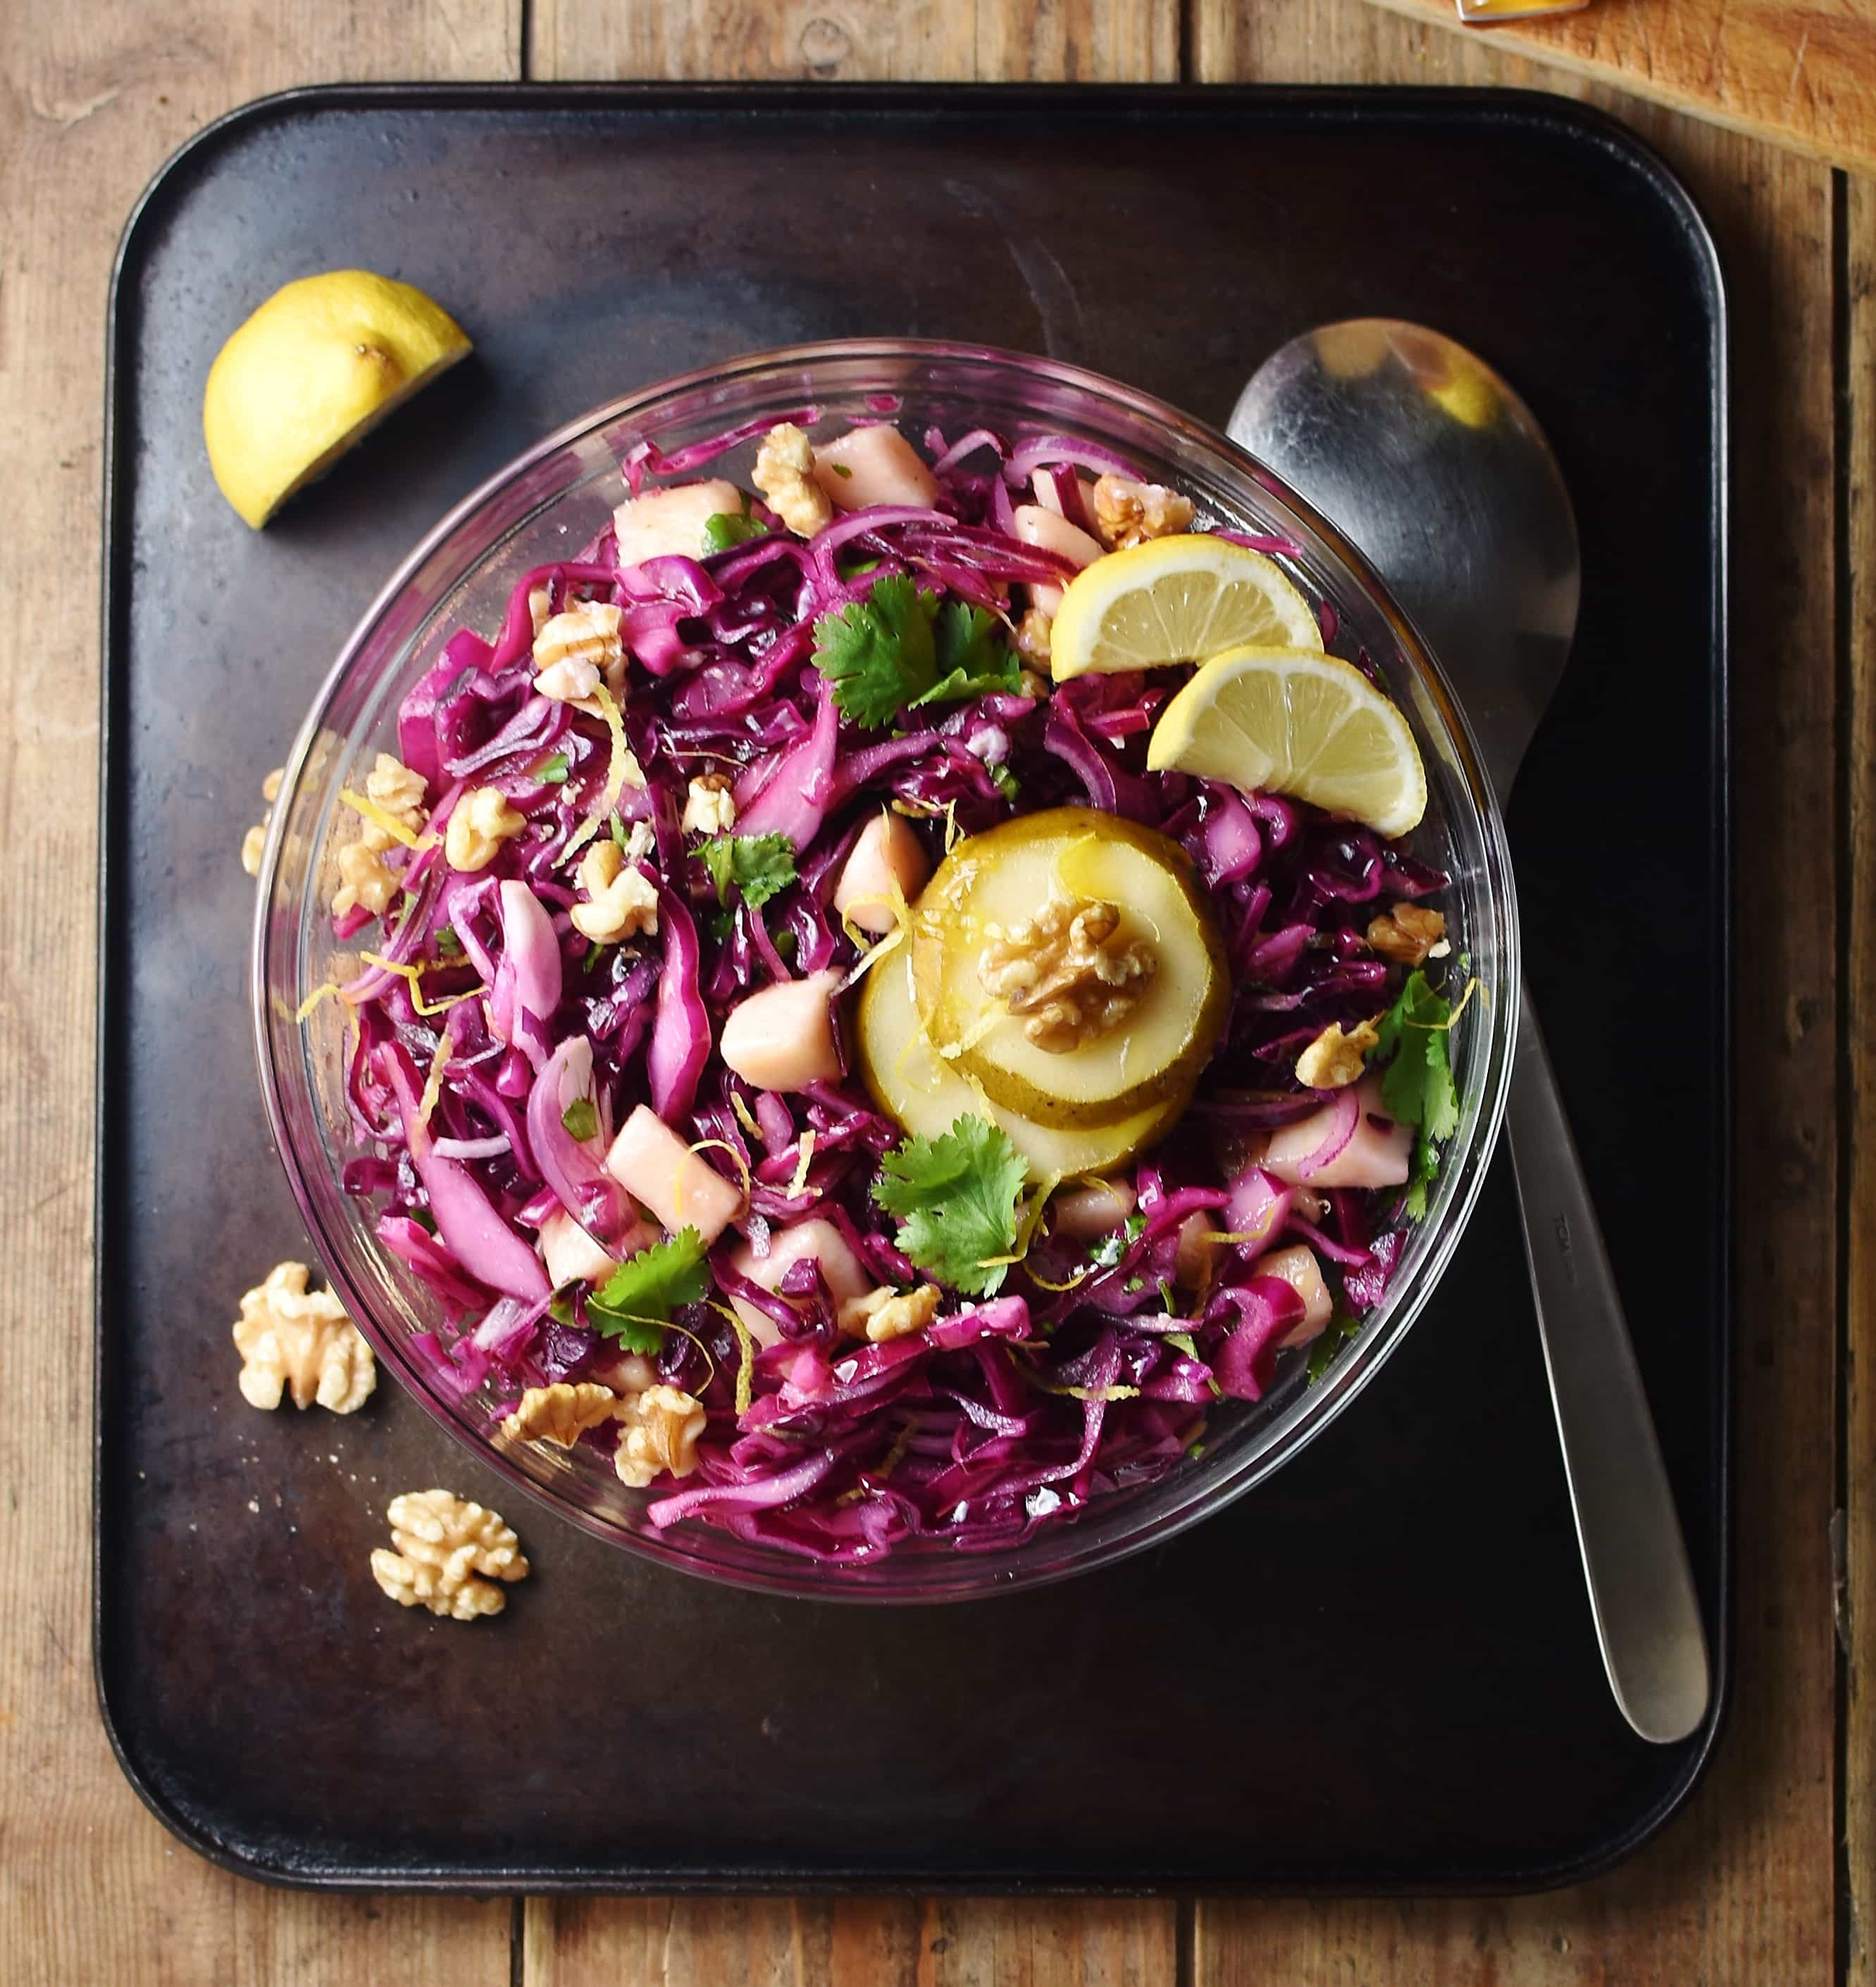 Chopped red cabbage, pear slices, walnuts and herbs in bowl, with large spoon to the right, walnuts and lemon wedge to the left.